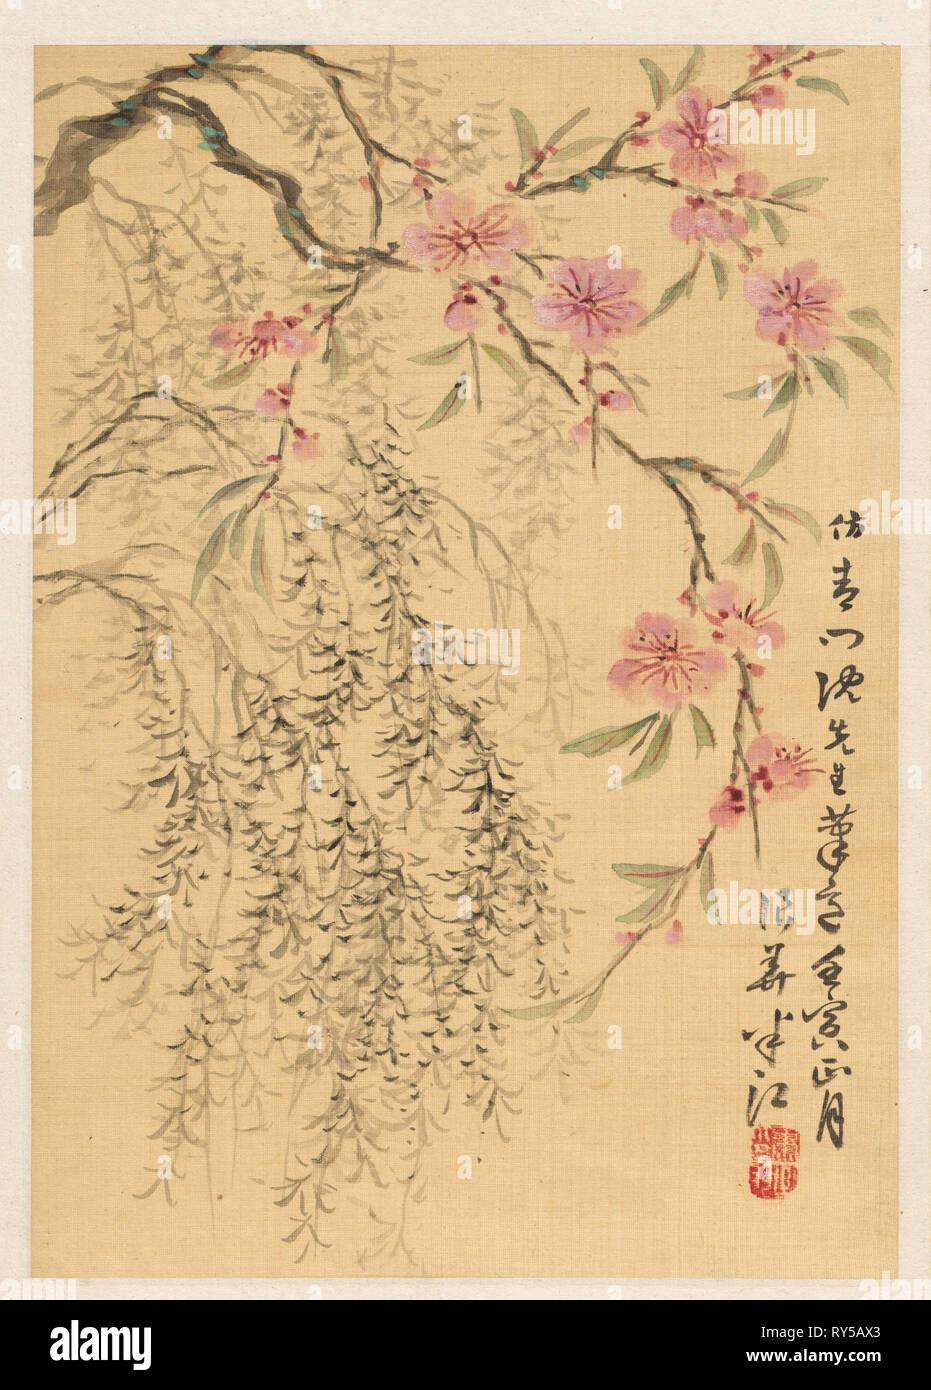 Peach Blossoms and Willows, 1842. Hanko Okada (Japanese, 1782-1845). Album leaf; ink and color on ivory silk; sheet: 26.1 x 18.4 cm (10 1/4 x 7 1/4 in Stock Photo